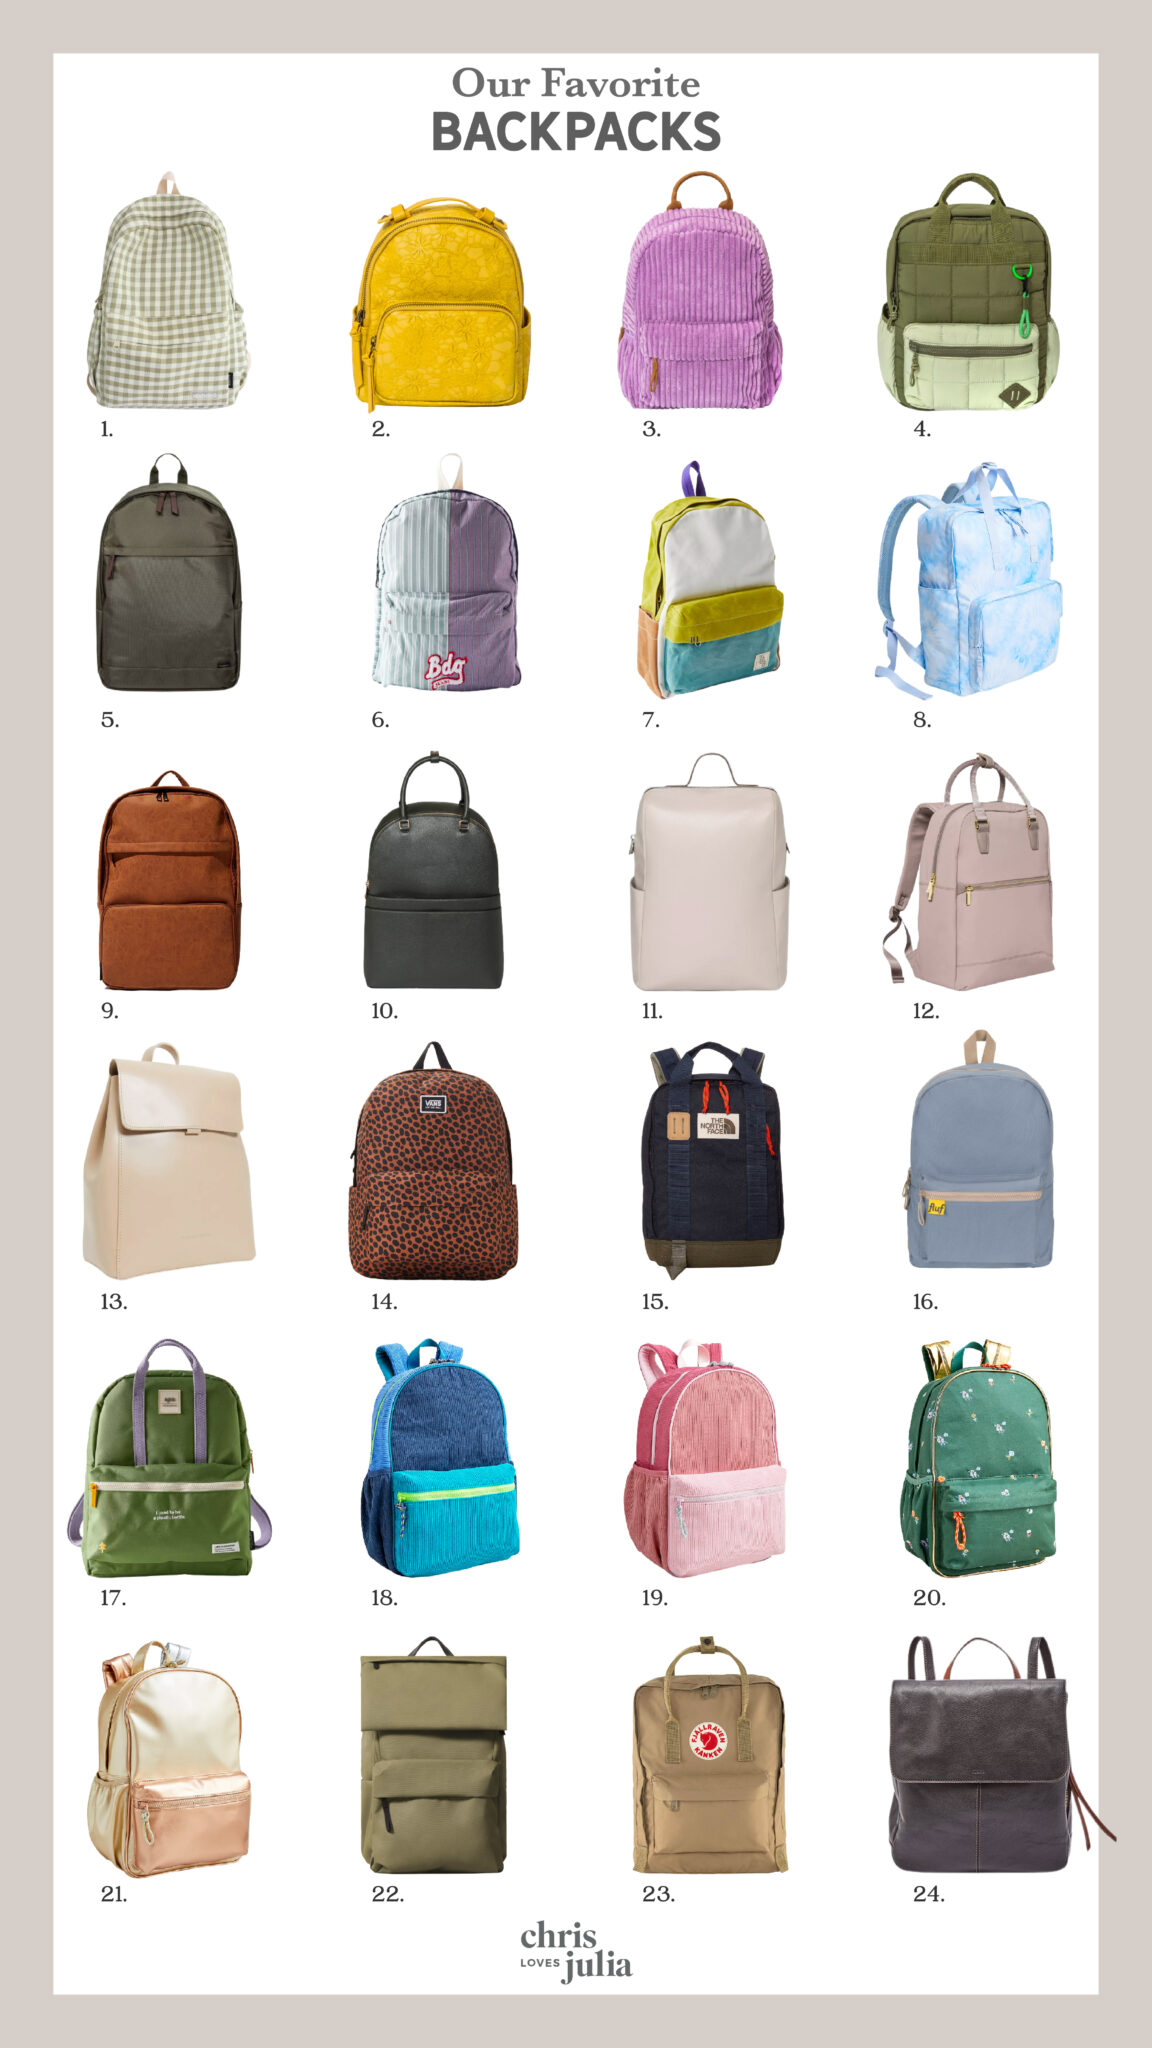 8 Back-to-School Bags to Shop From Backpacks and Totes to